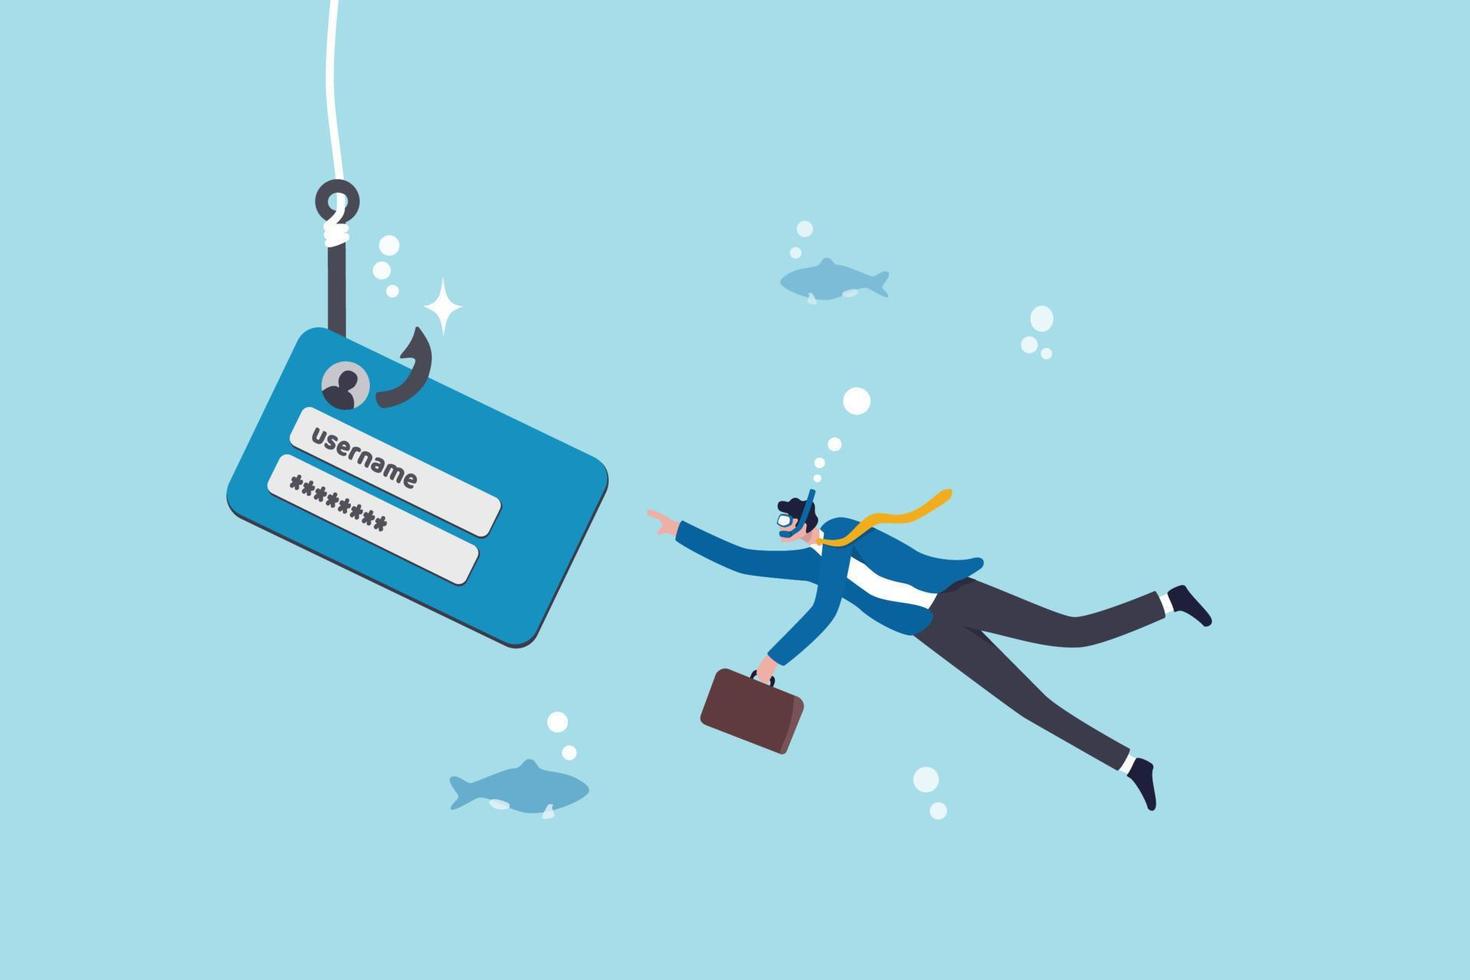 Phishing or stealing personal information, fake login screen to hack username, password, cyber security or threat website concept, businessman diving to unknown fishhook user account phishing login. vector